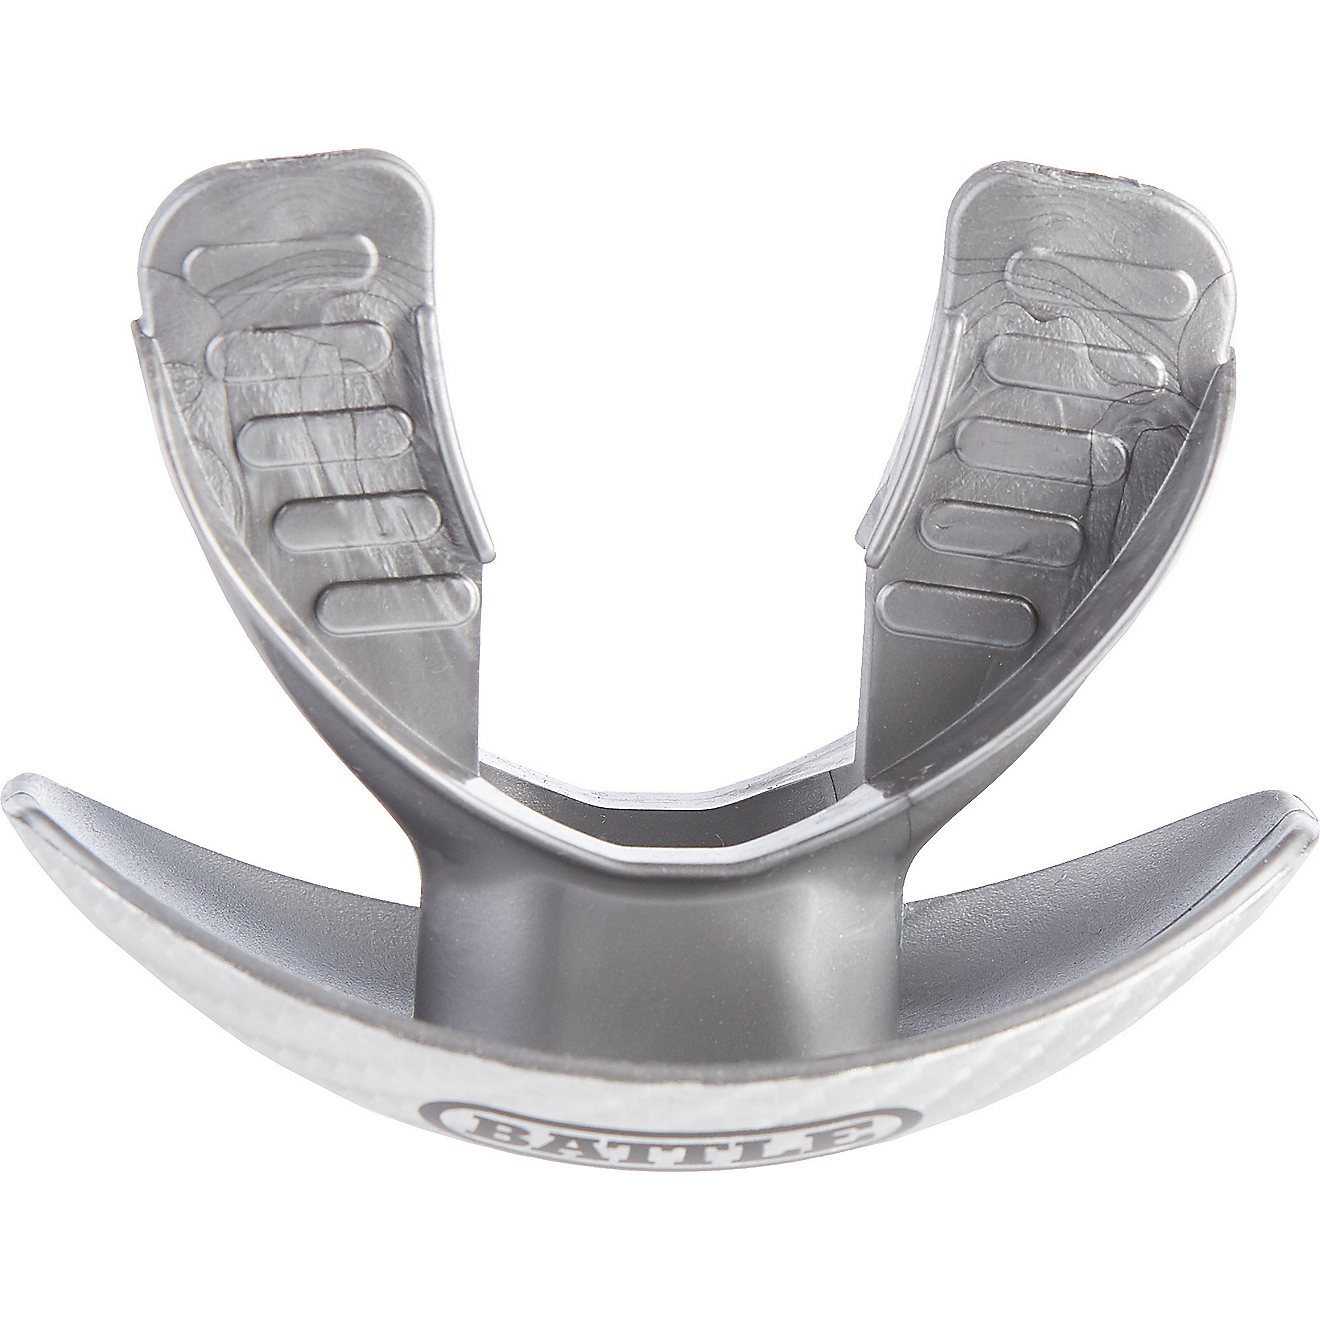 Battle Adults' Carbon Chrome Oxygen Football Mouth Guard                                                                         - view number 3